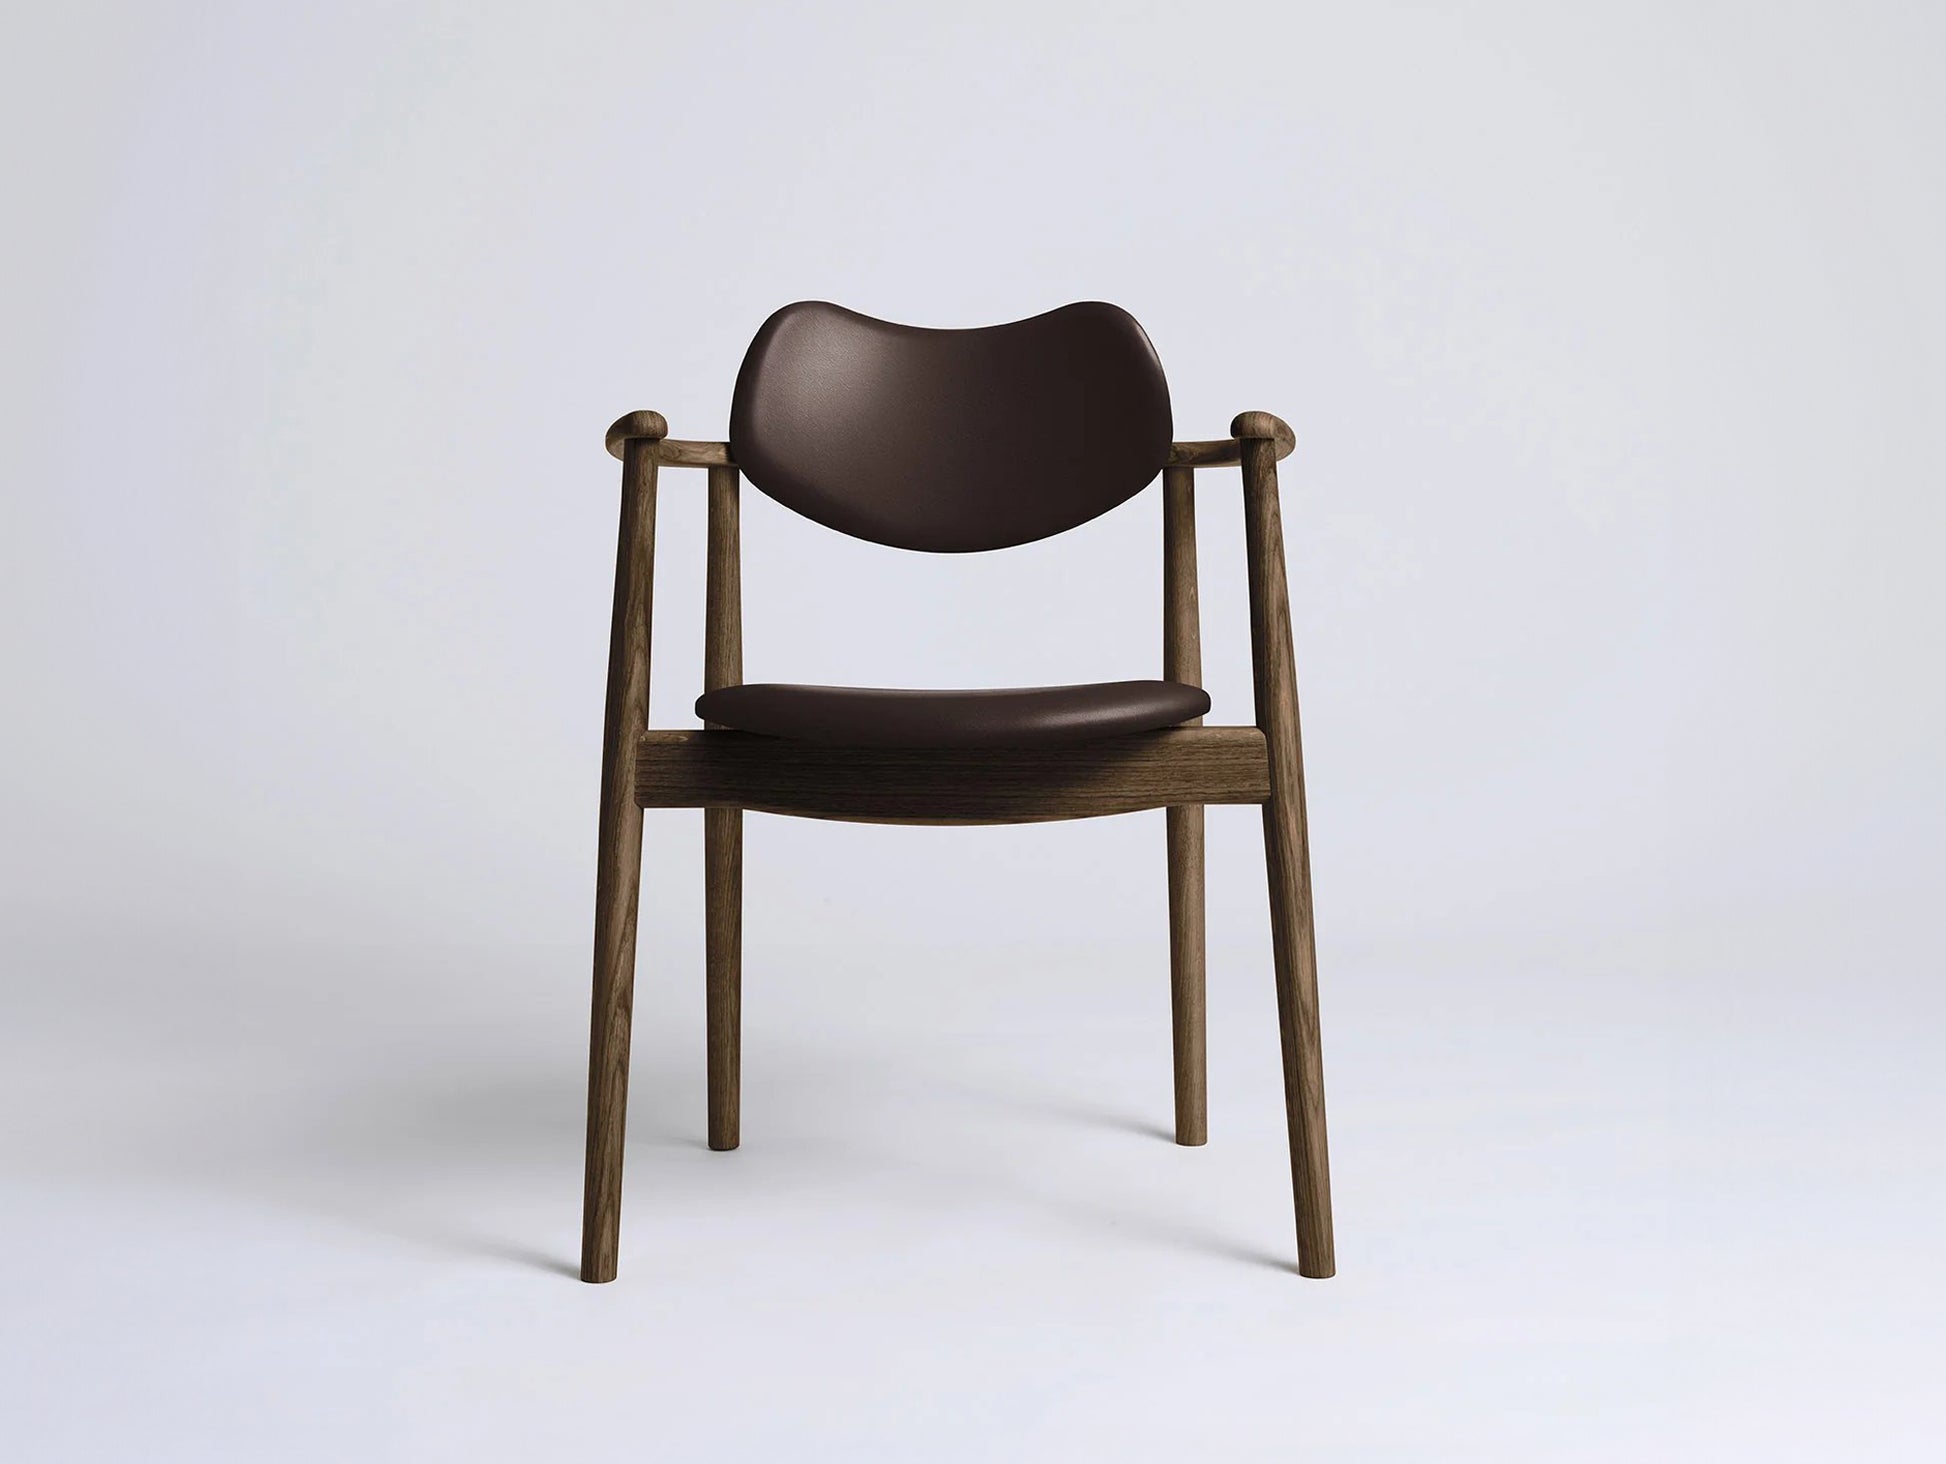 Regatta Chair Seat and Back Upholstered by Ro Collection - Smoked Oak / Exclusive Chocolate Brown Leather